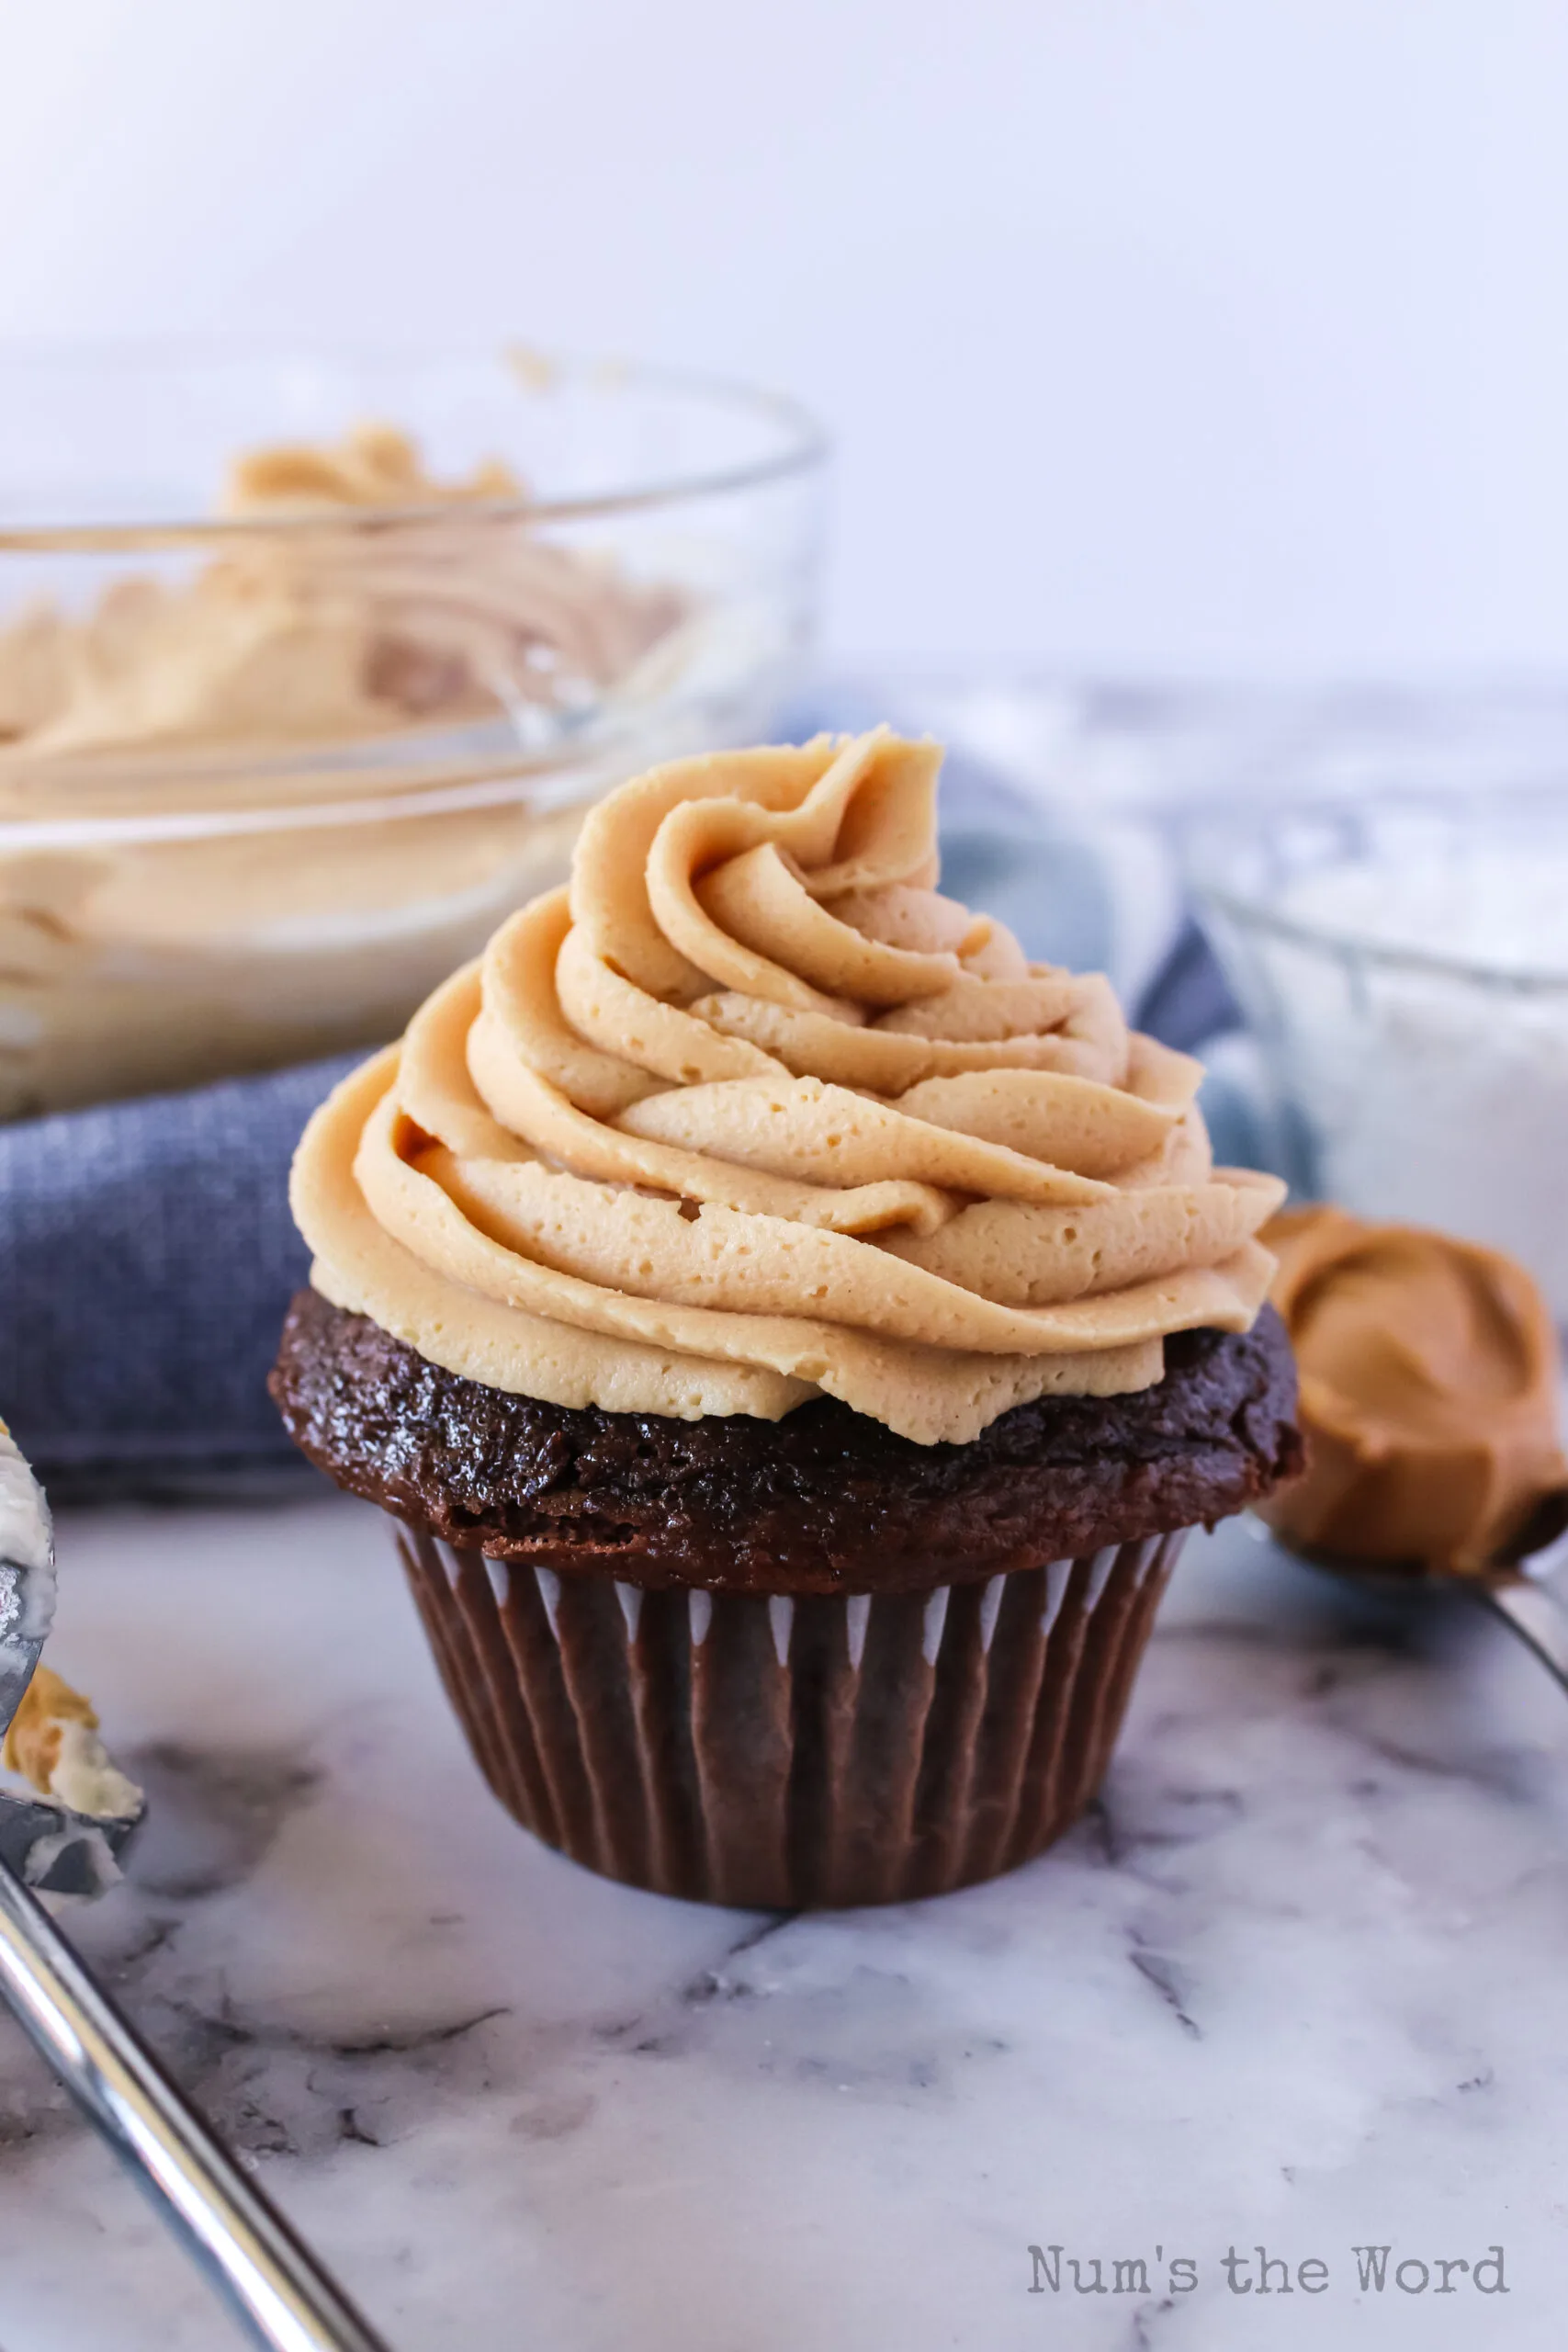 peanut butter frosting on a chocolate cupcake